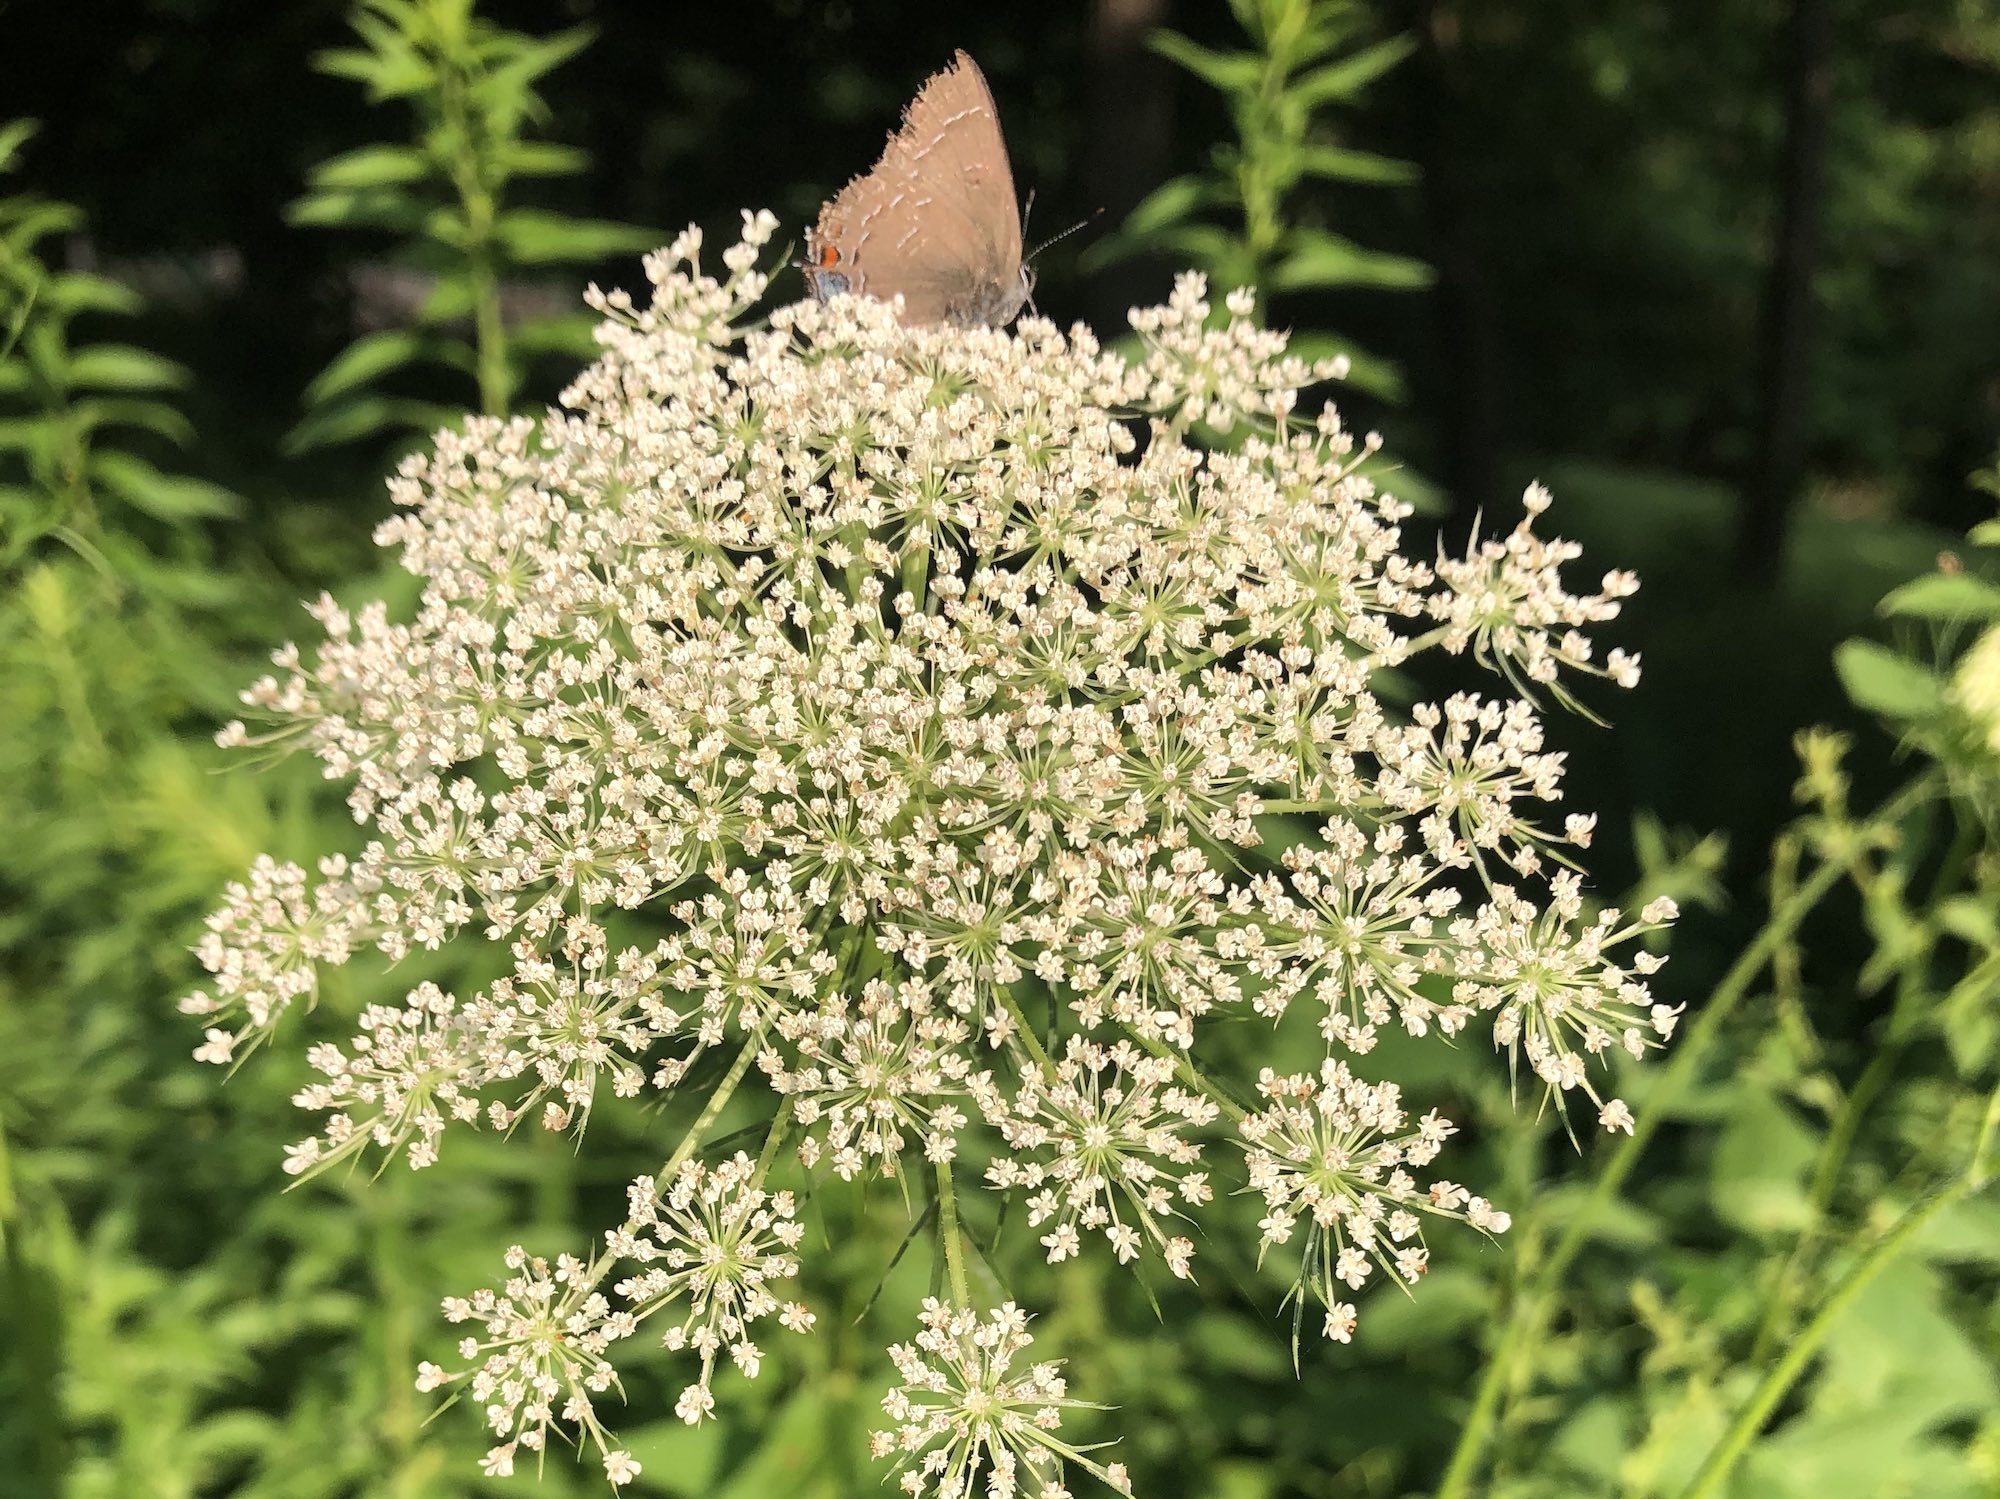 Hairstreak butterfly on Queen Anne's Lace in Nakoma Park on July 9, 2020.